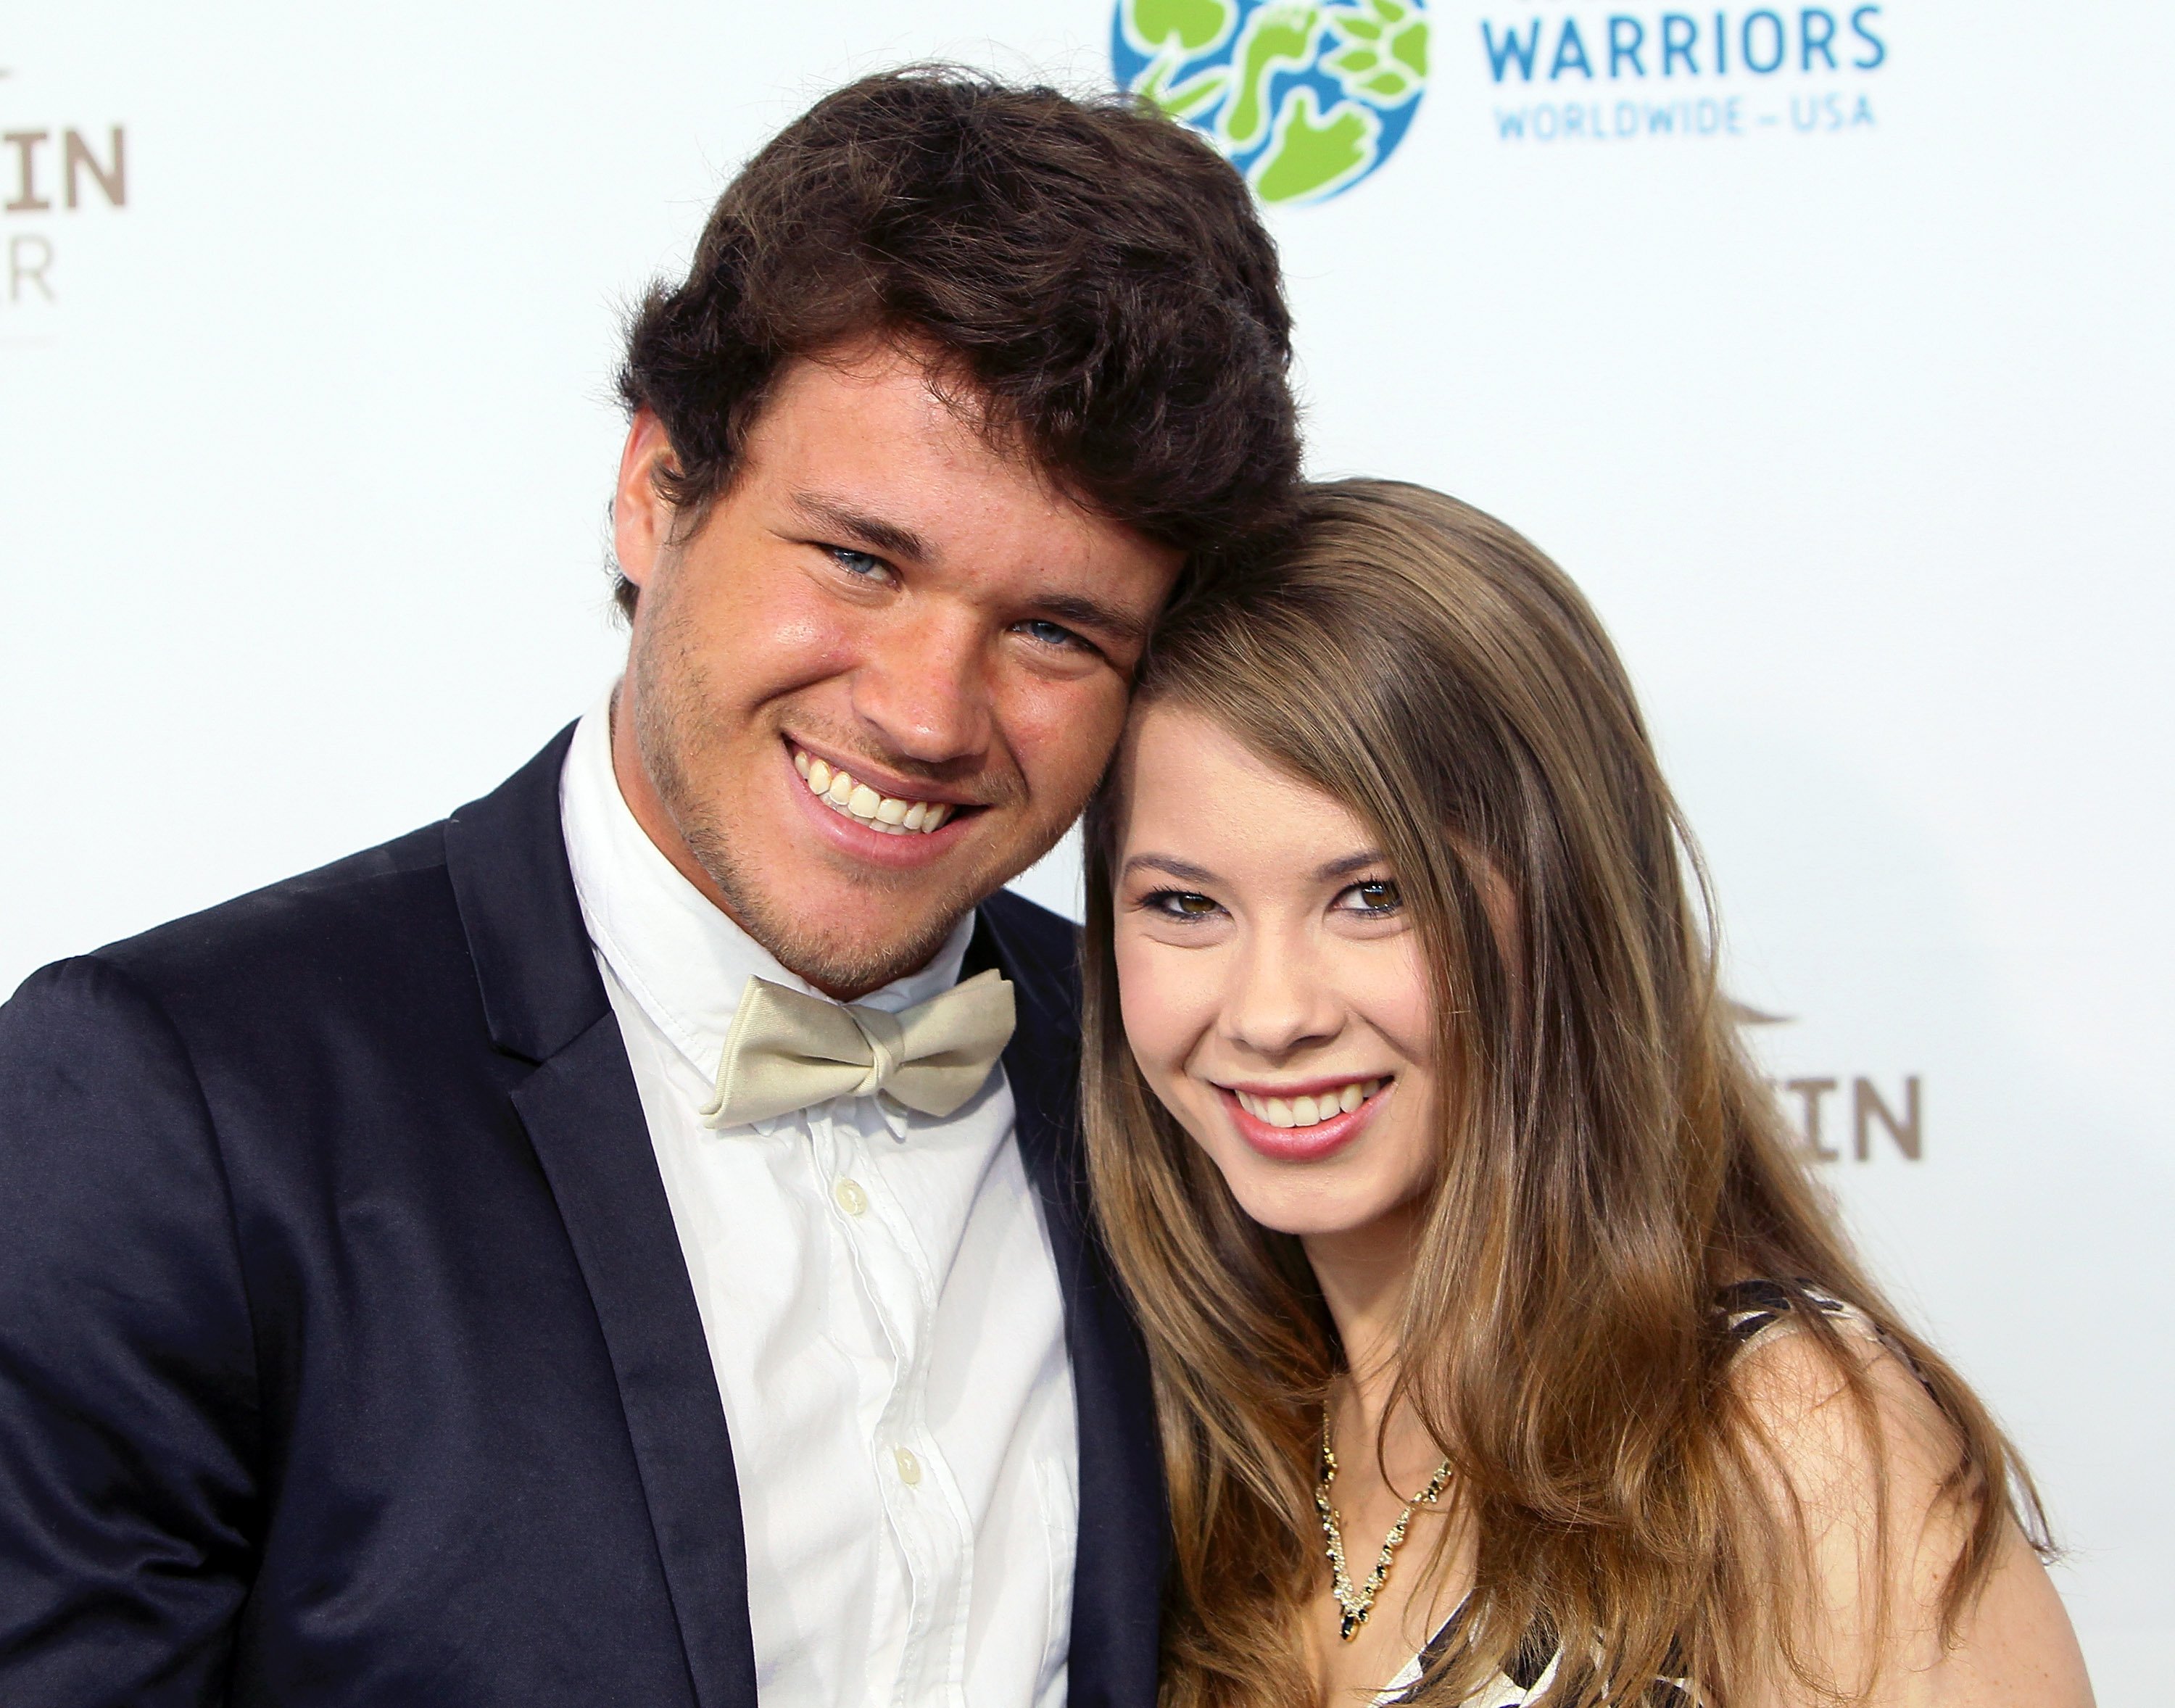 Chandler Powell and TV personality Bindi Irwin attend the 2016 Steve Irwin Gala Dinner in Los Angeles, California. | Photo: Getty Images